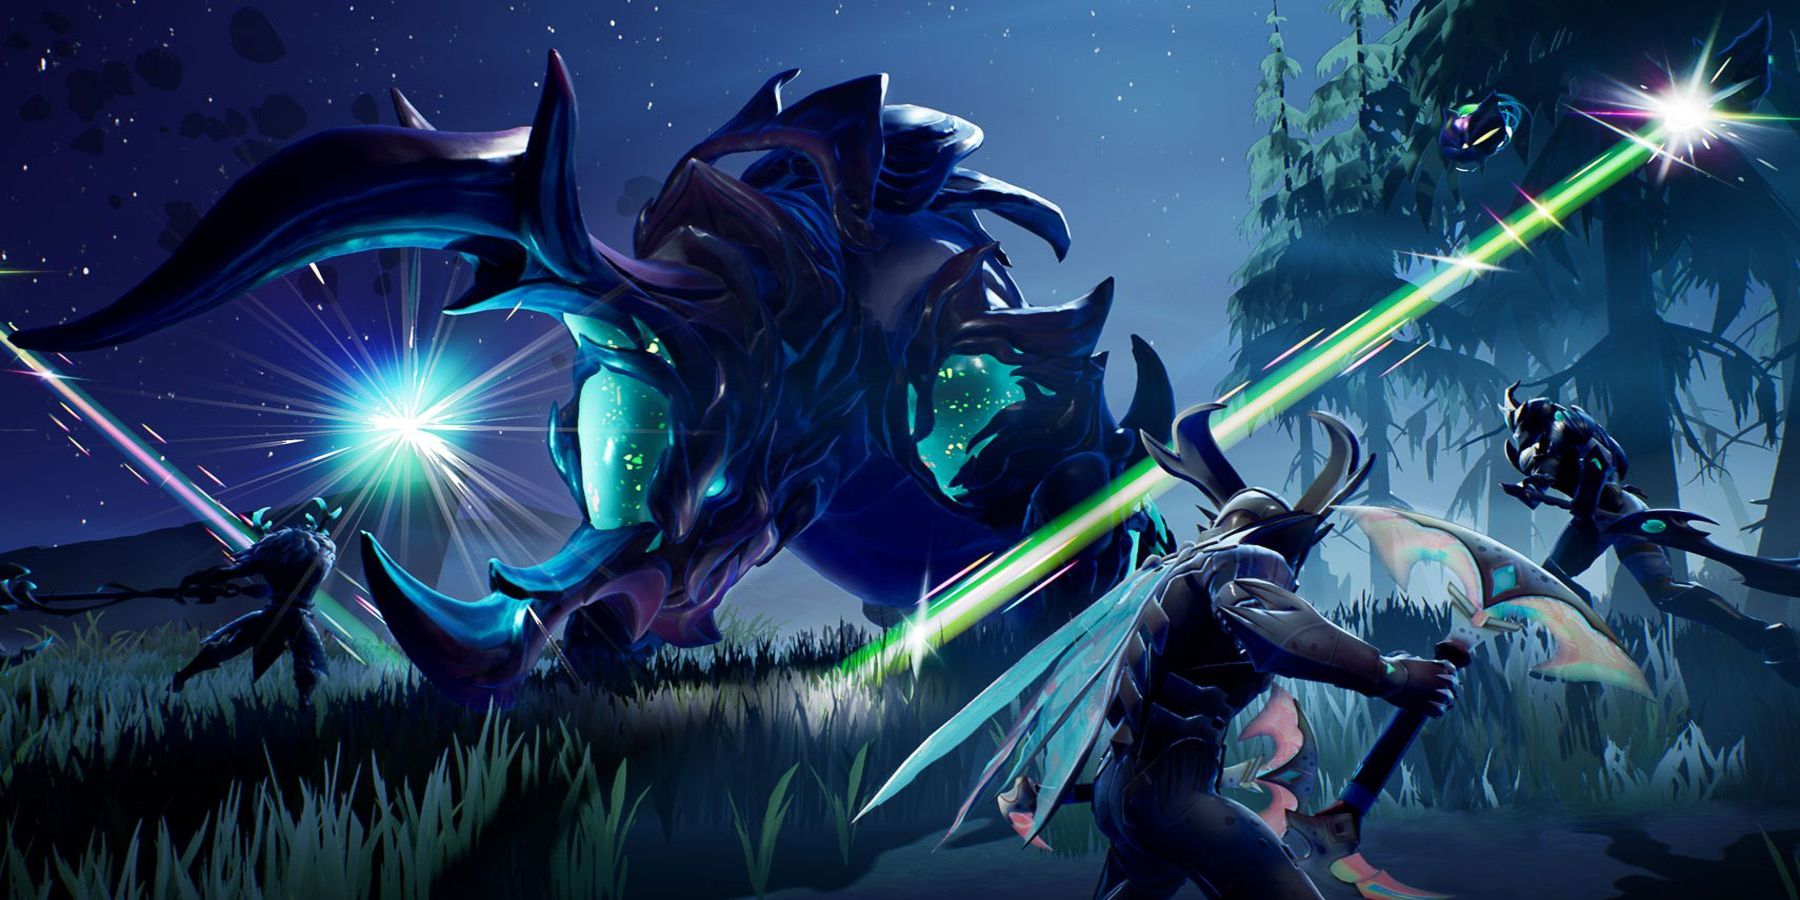 Art from the Nintendo Switch video game Dauntless.